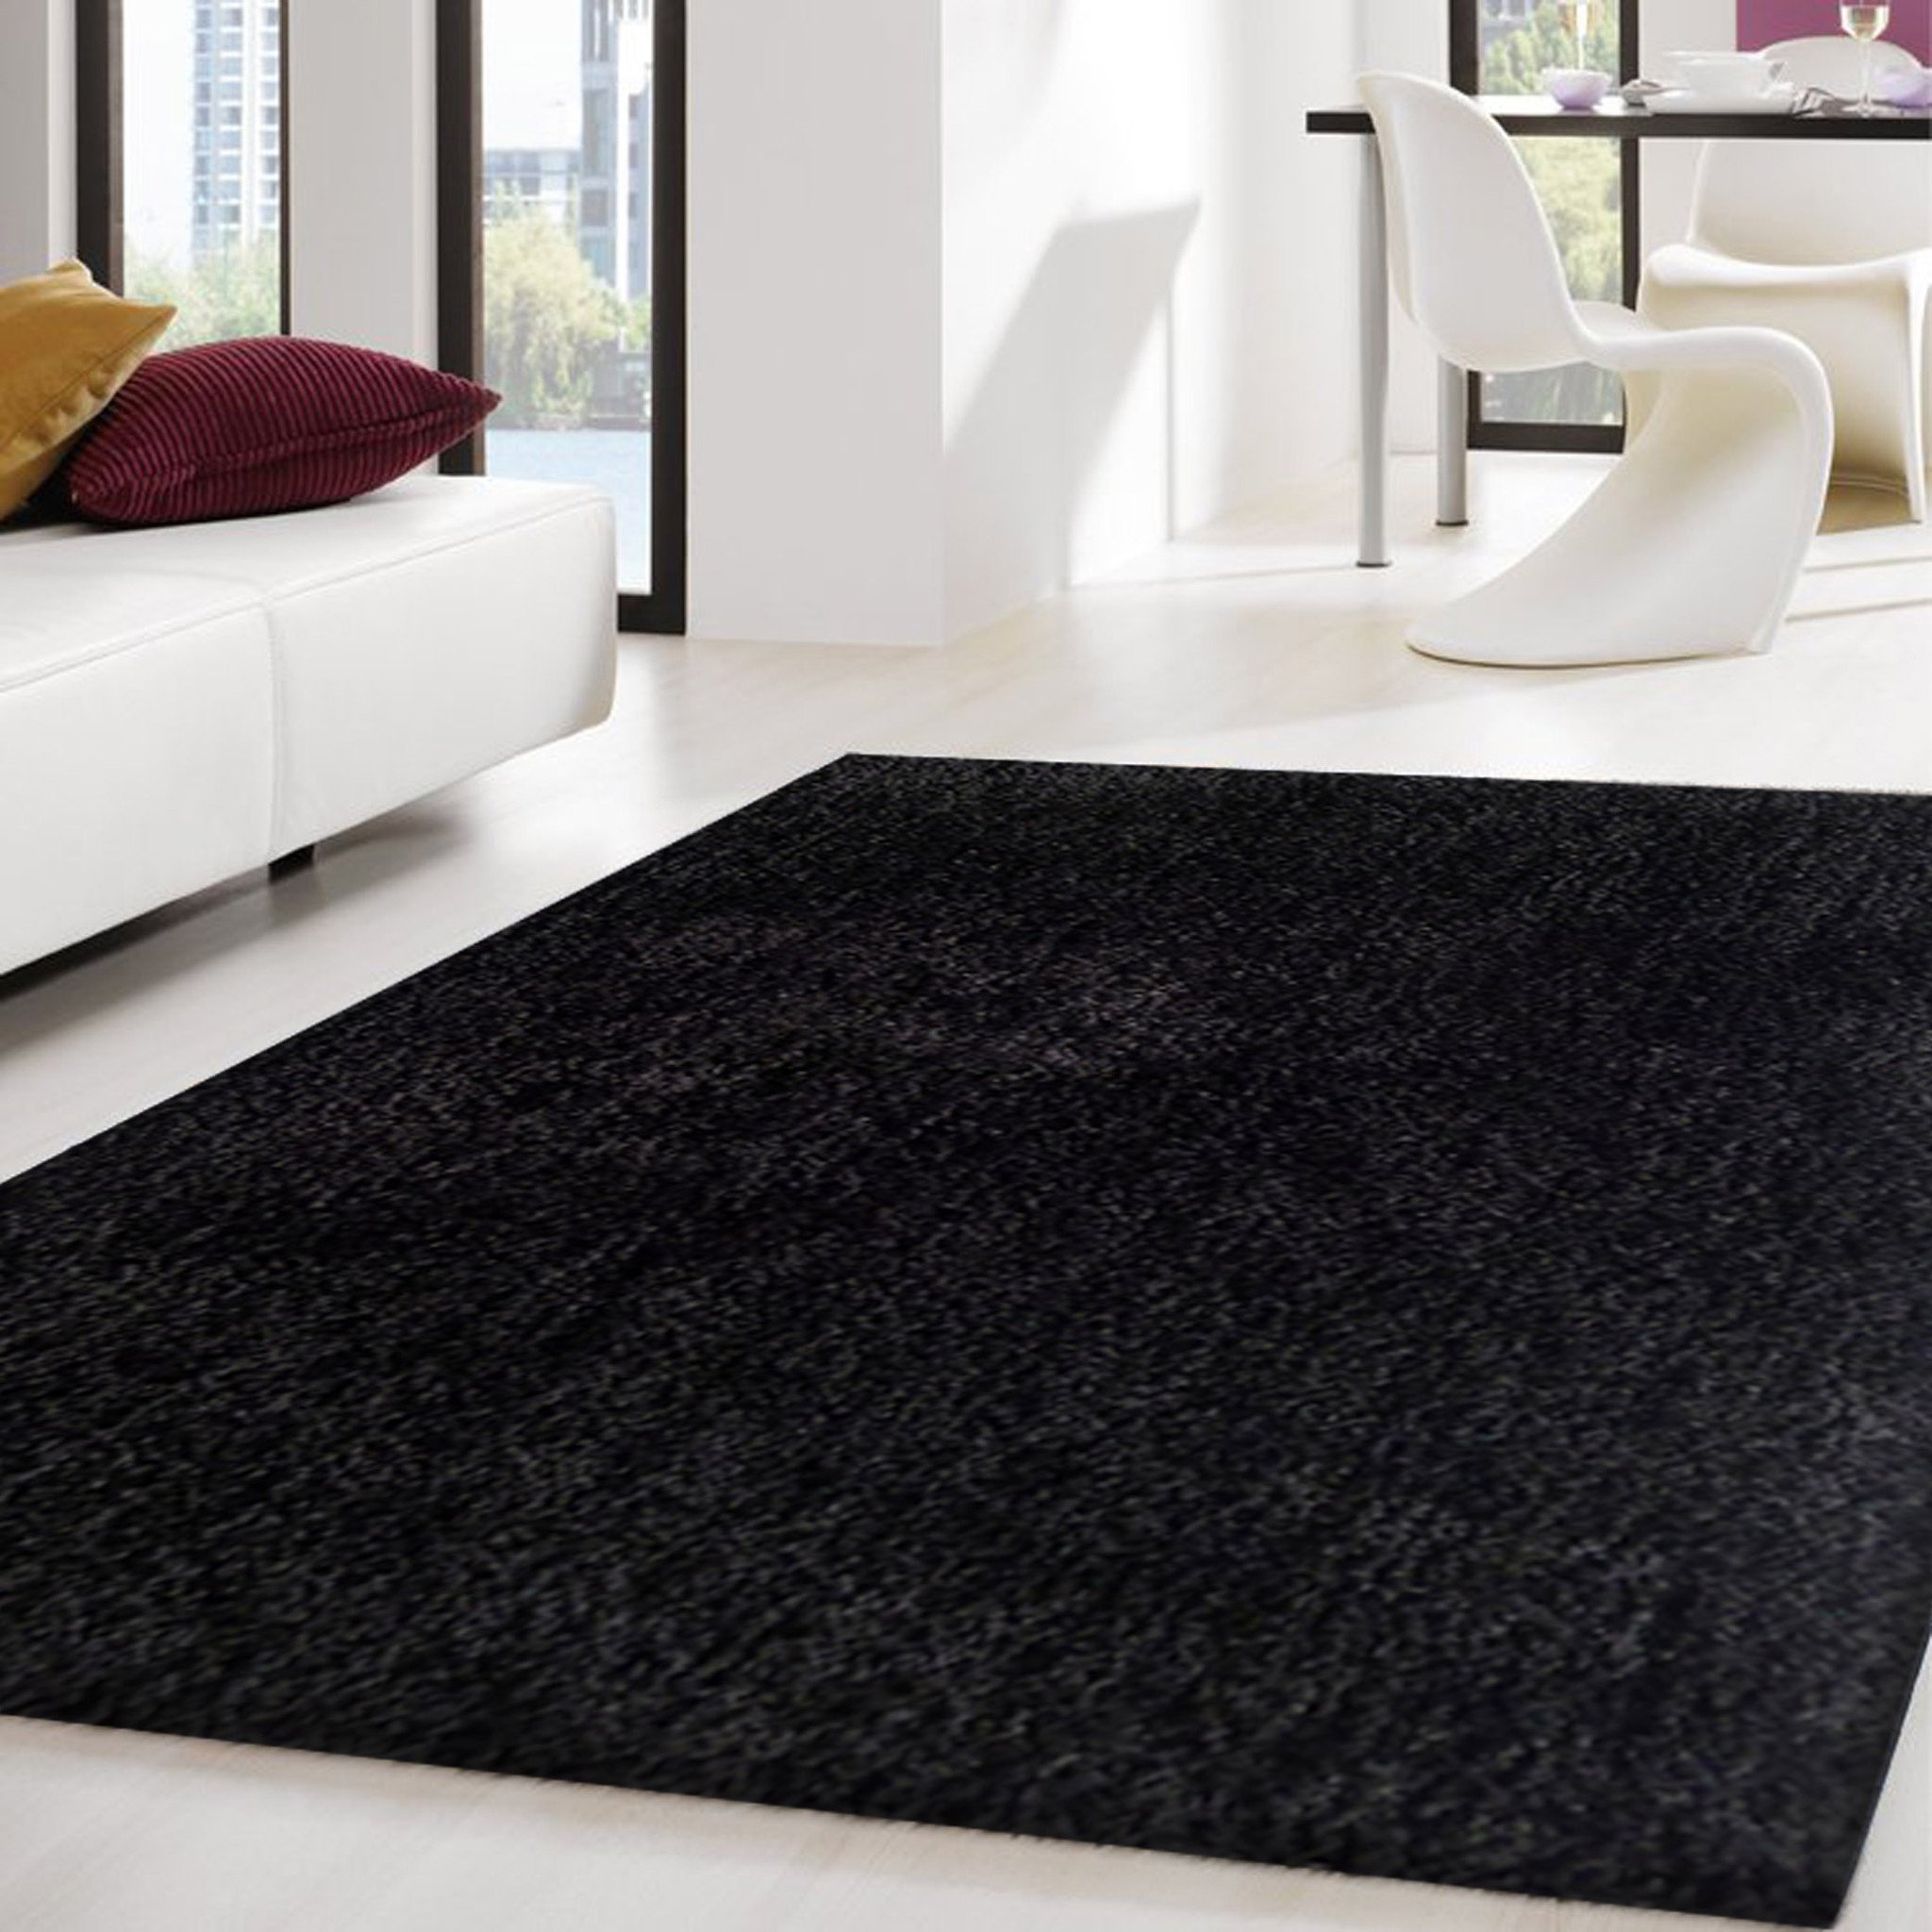 Black rugs 2-piece set | solid black thick plush shag area rug with rug pad WNELUCI